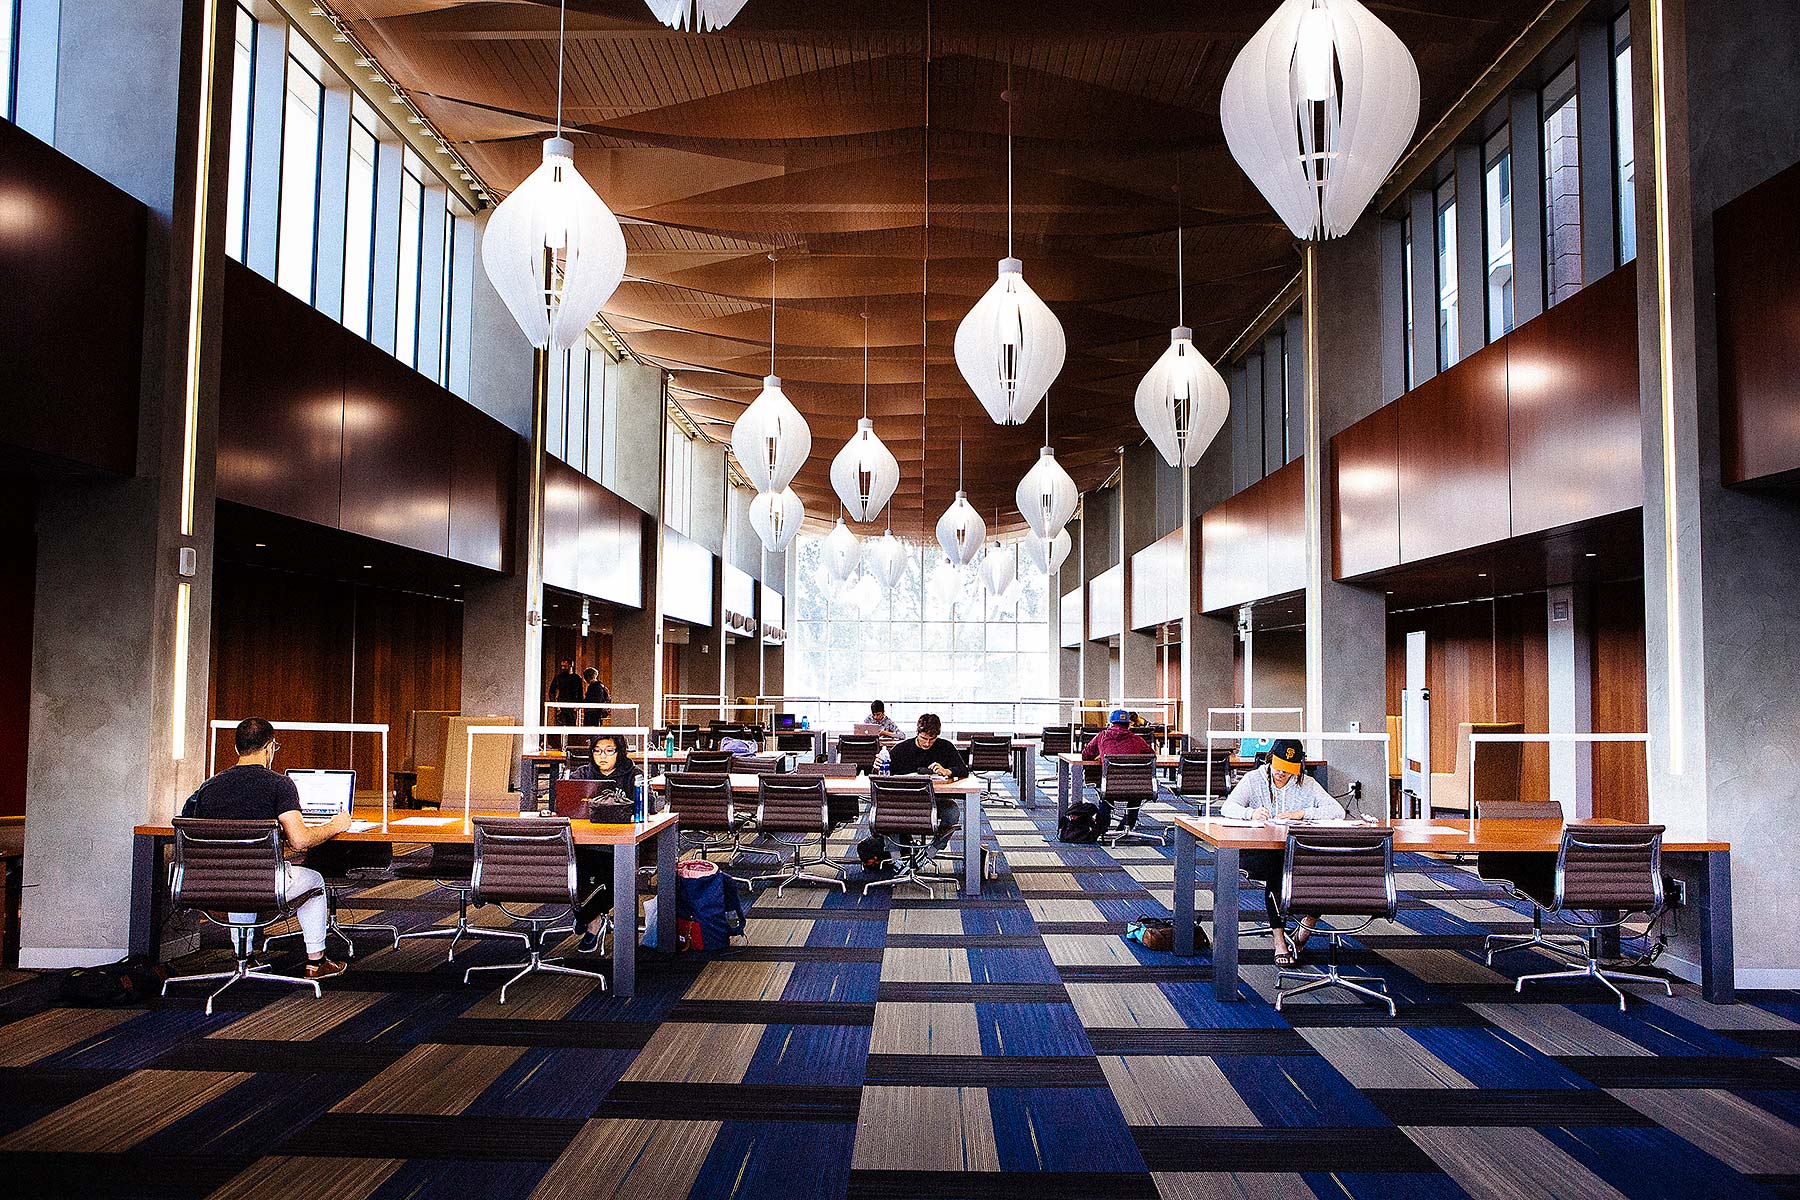 Panoramic view of UCSB library with students at desks and haning chandeliers